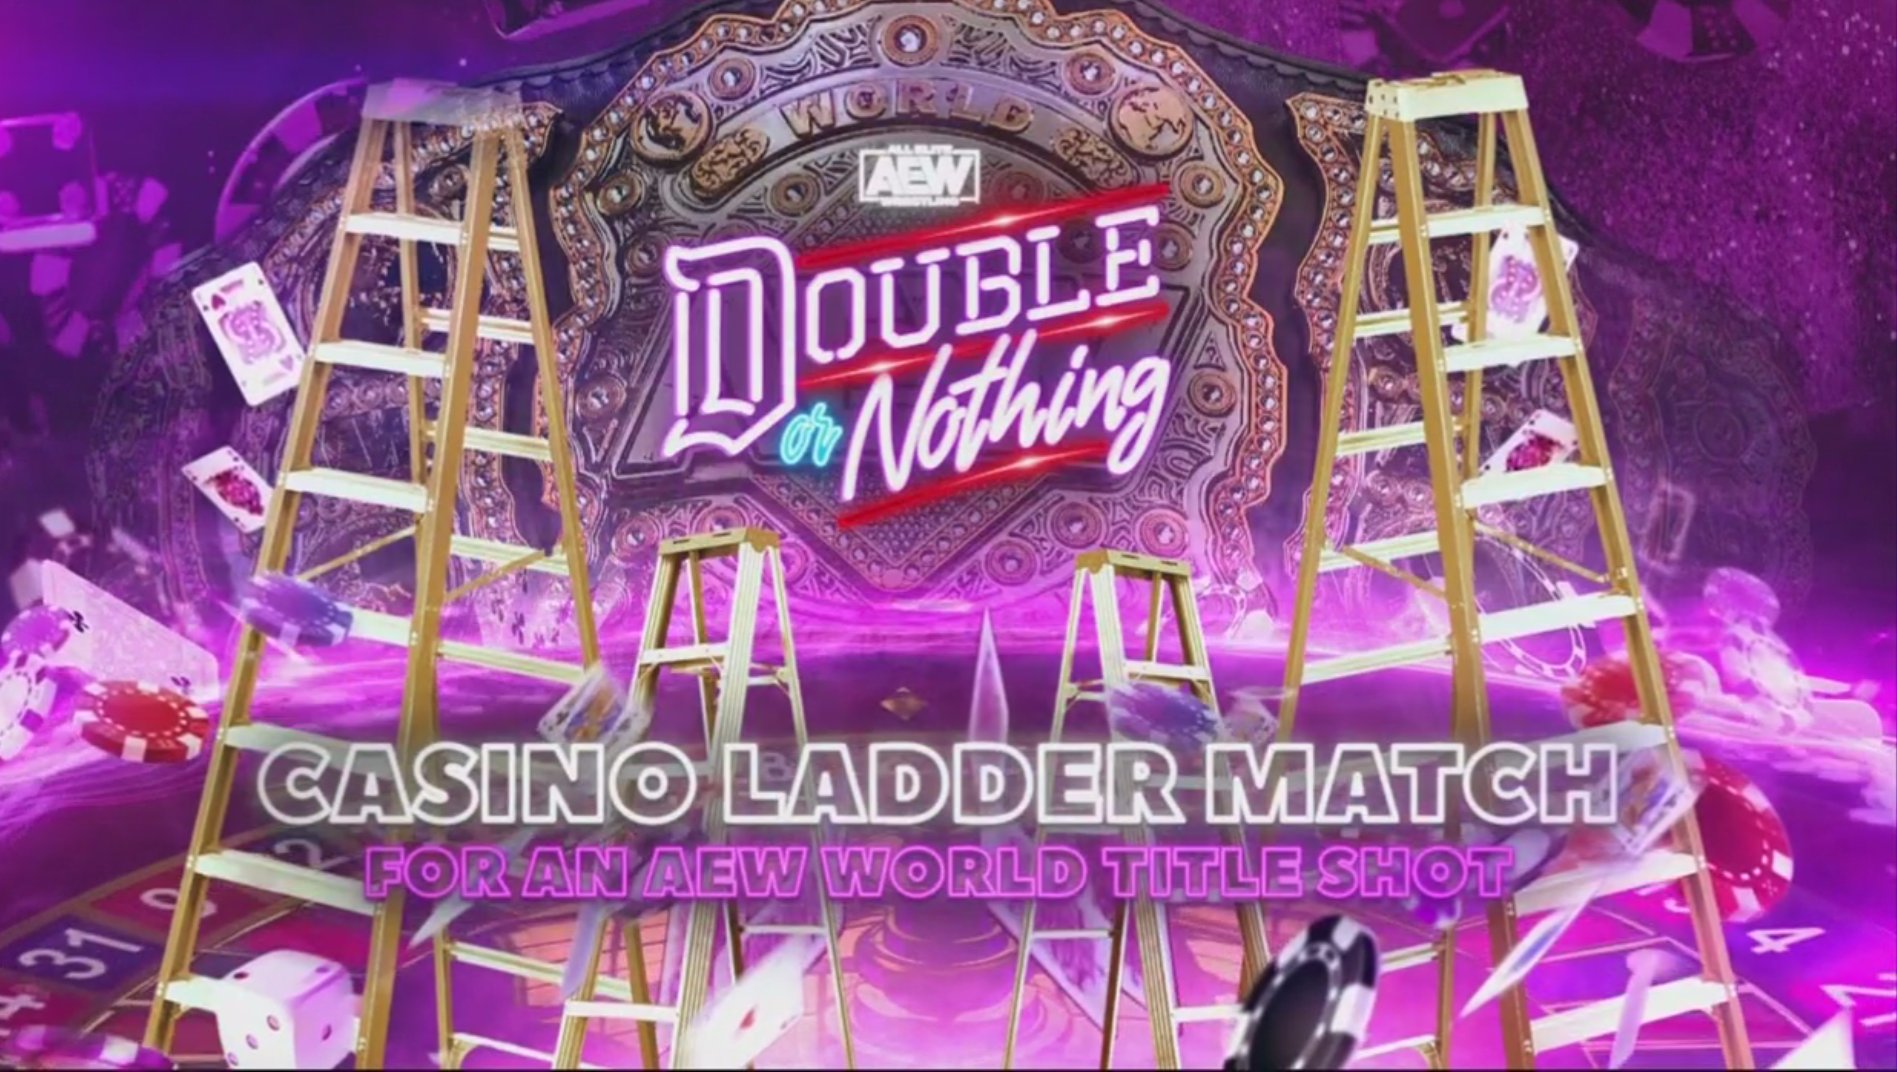 aew-double-or-nothing-results-casino-ladder-match-ewrestlingnews